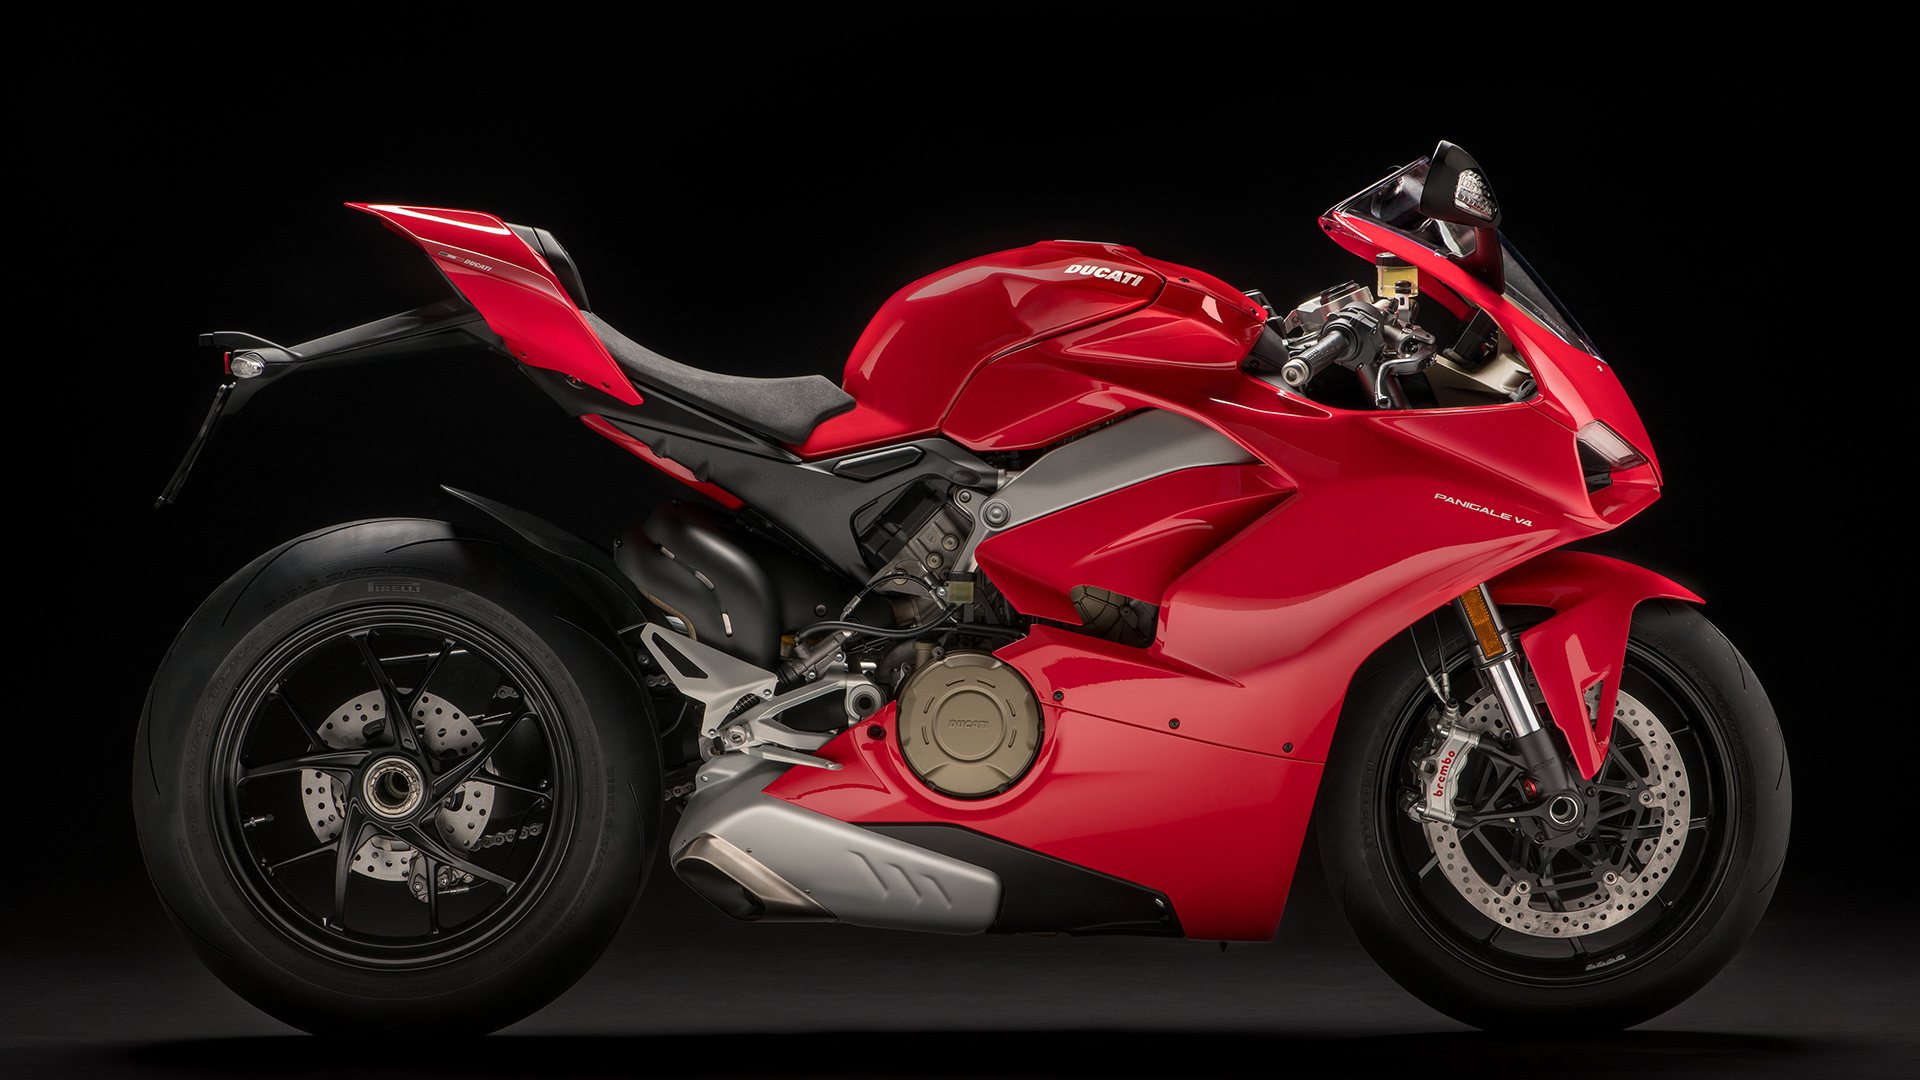 Ducati Superbike Panigale No Room For Compromise